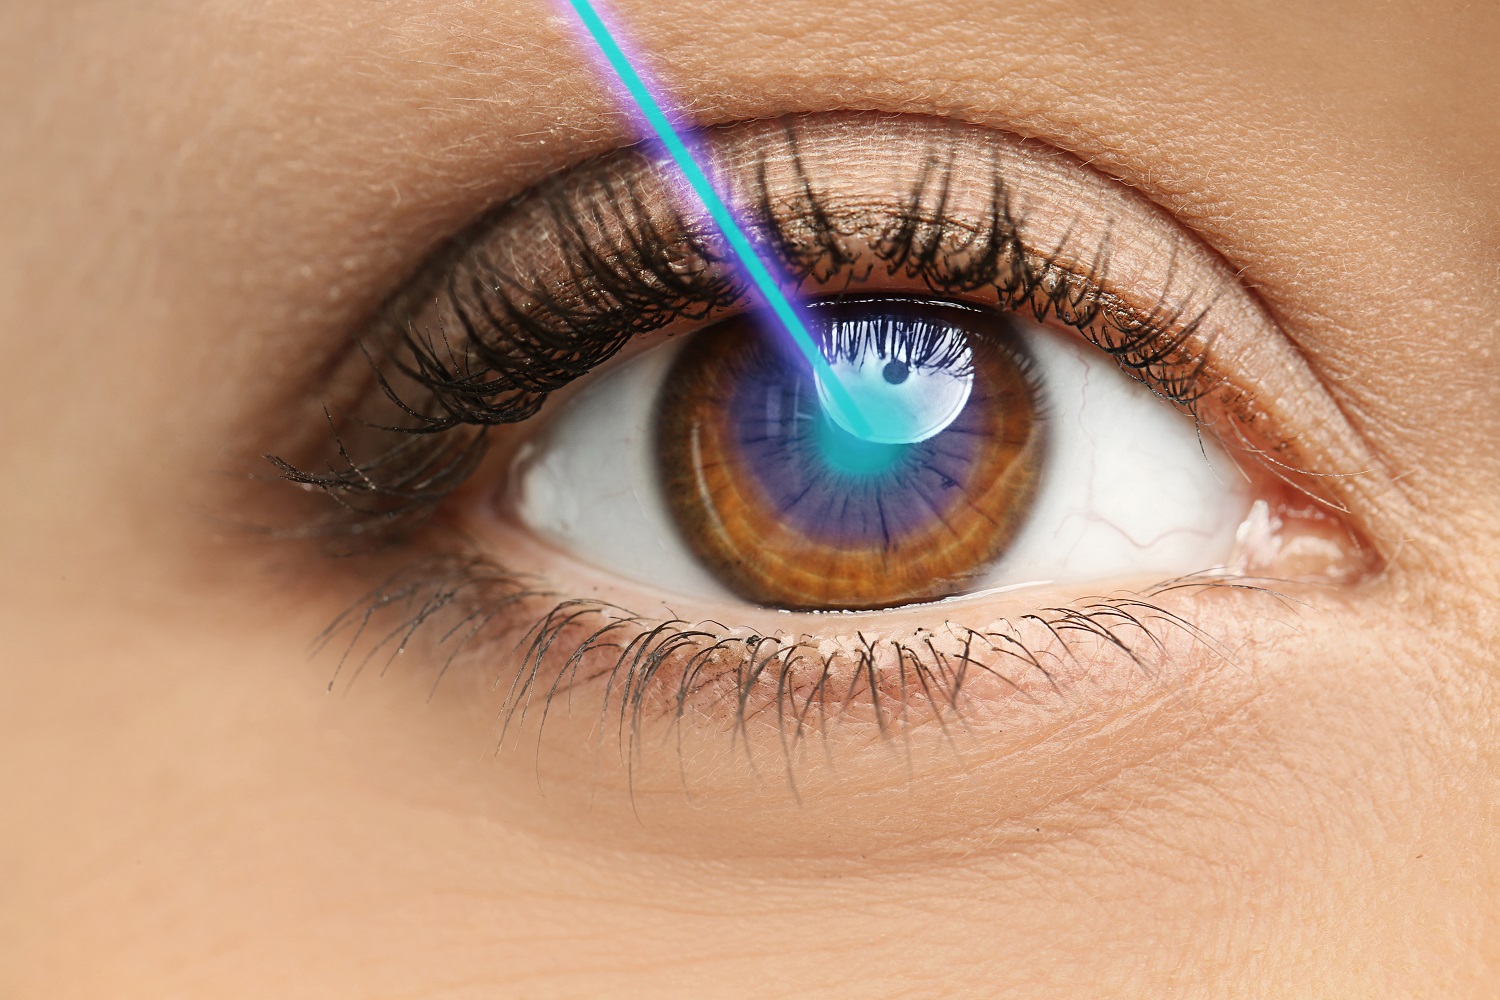 A brief guide on laser eye surgery